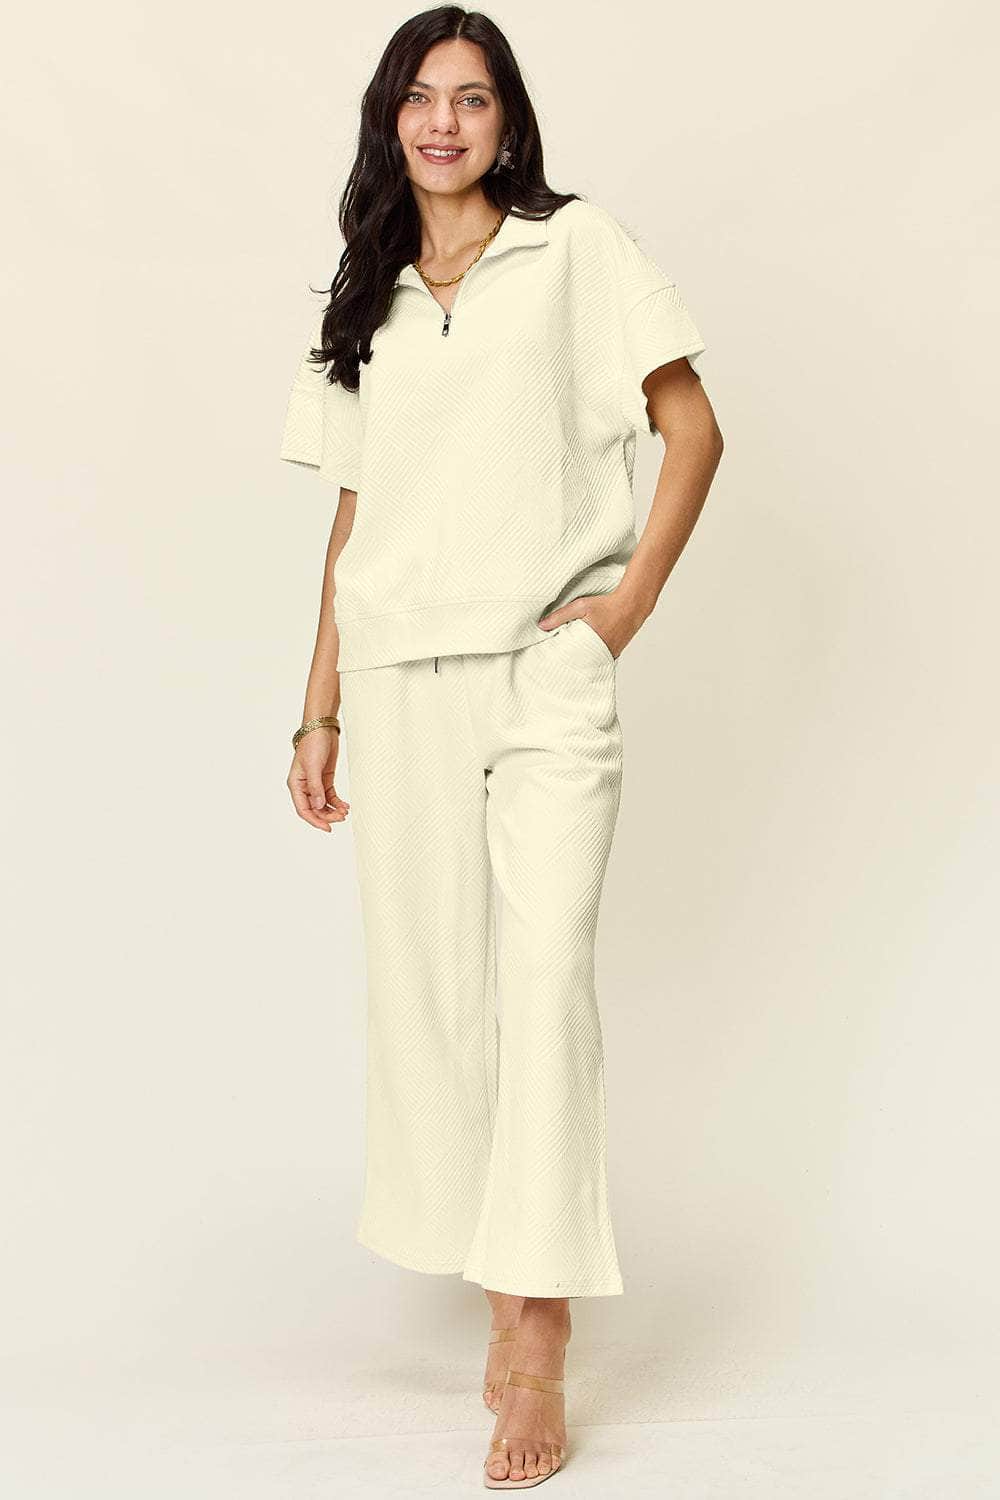 Double Take Full Size Texture Half Zip Short Sleeve Top and Pants Set Cream / S